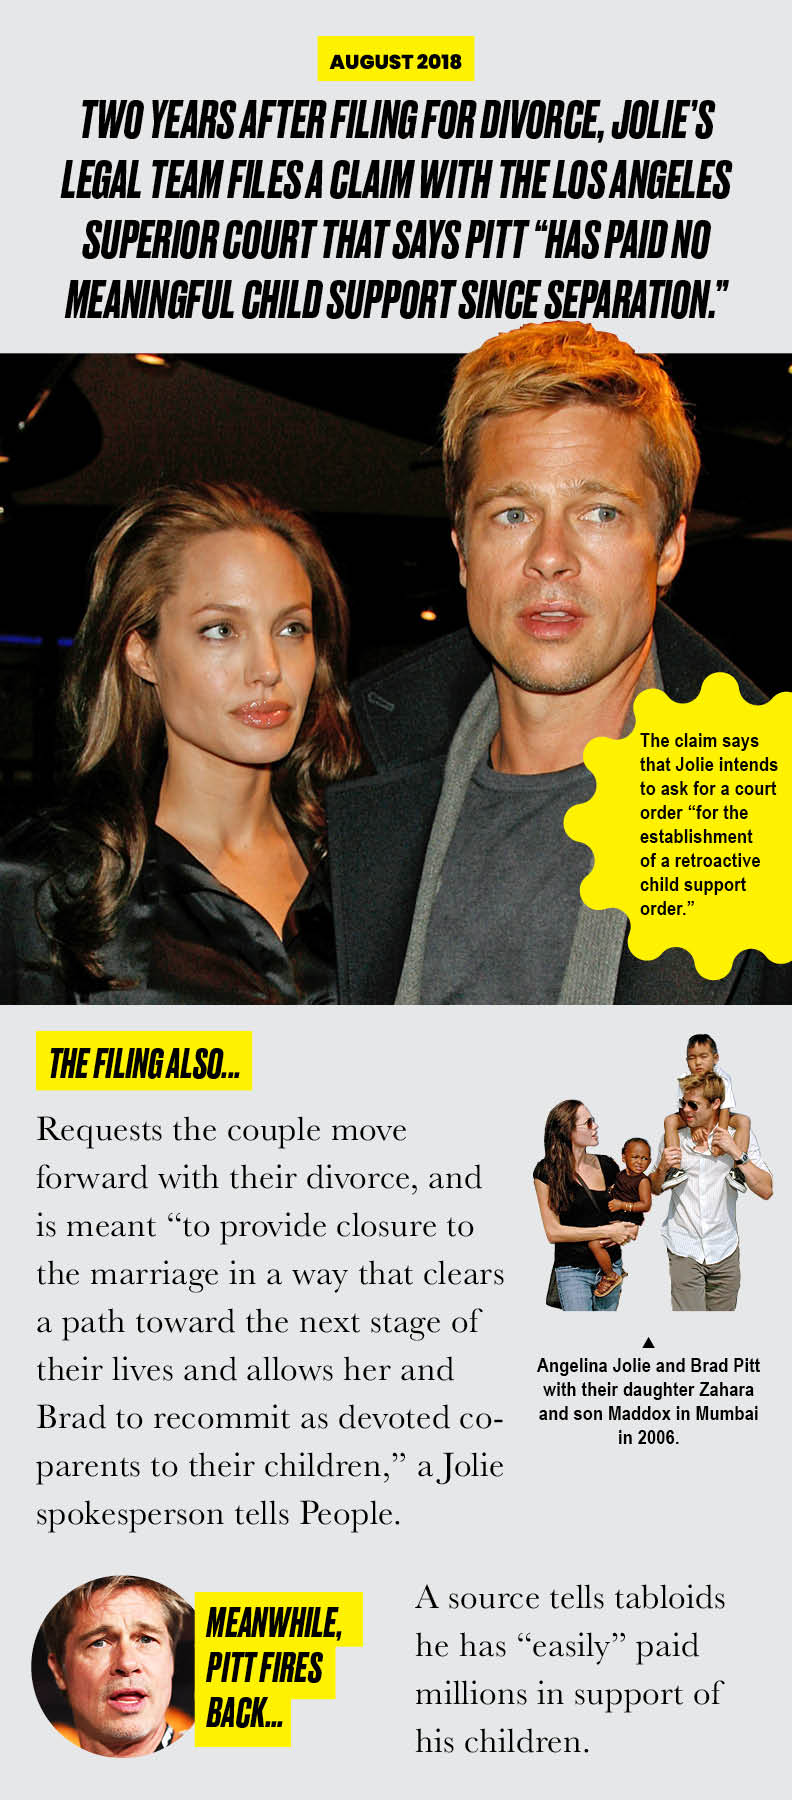 An infographic of Angelina Jolie and Brad Pitt